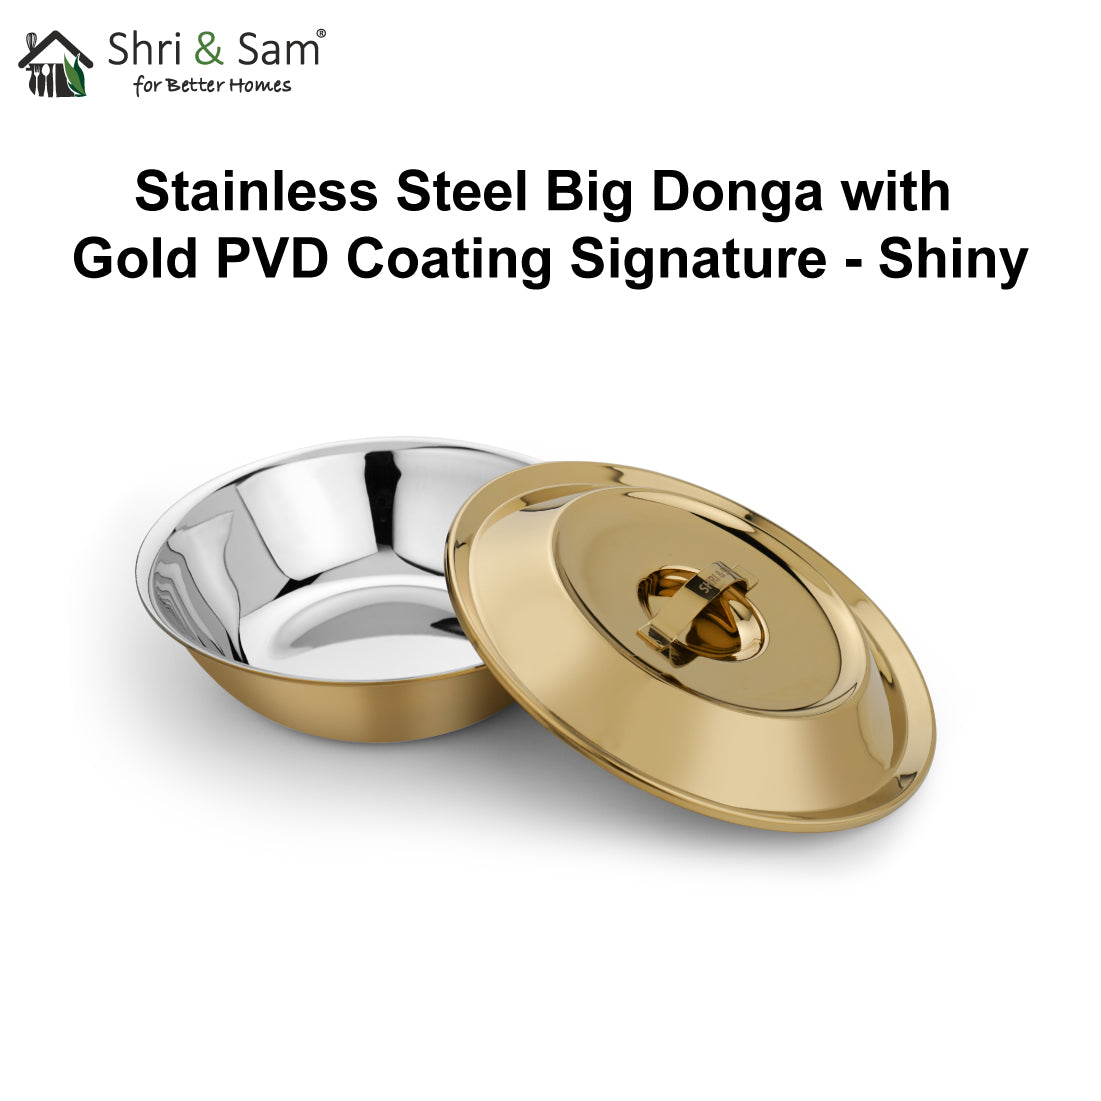 Stainless Steel Big Donga with Gold PVD Coating Signature - Shiny